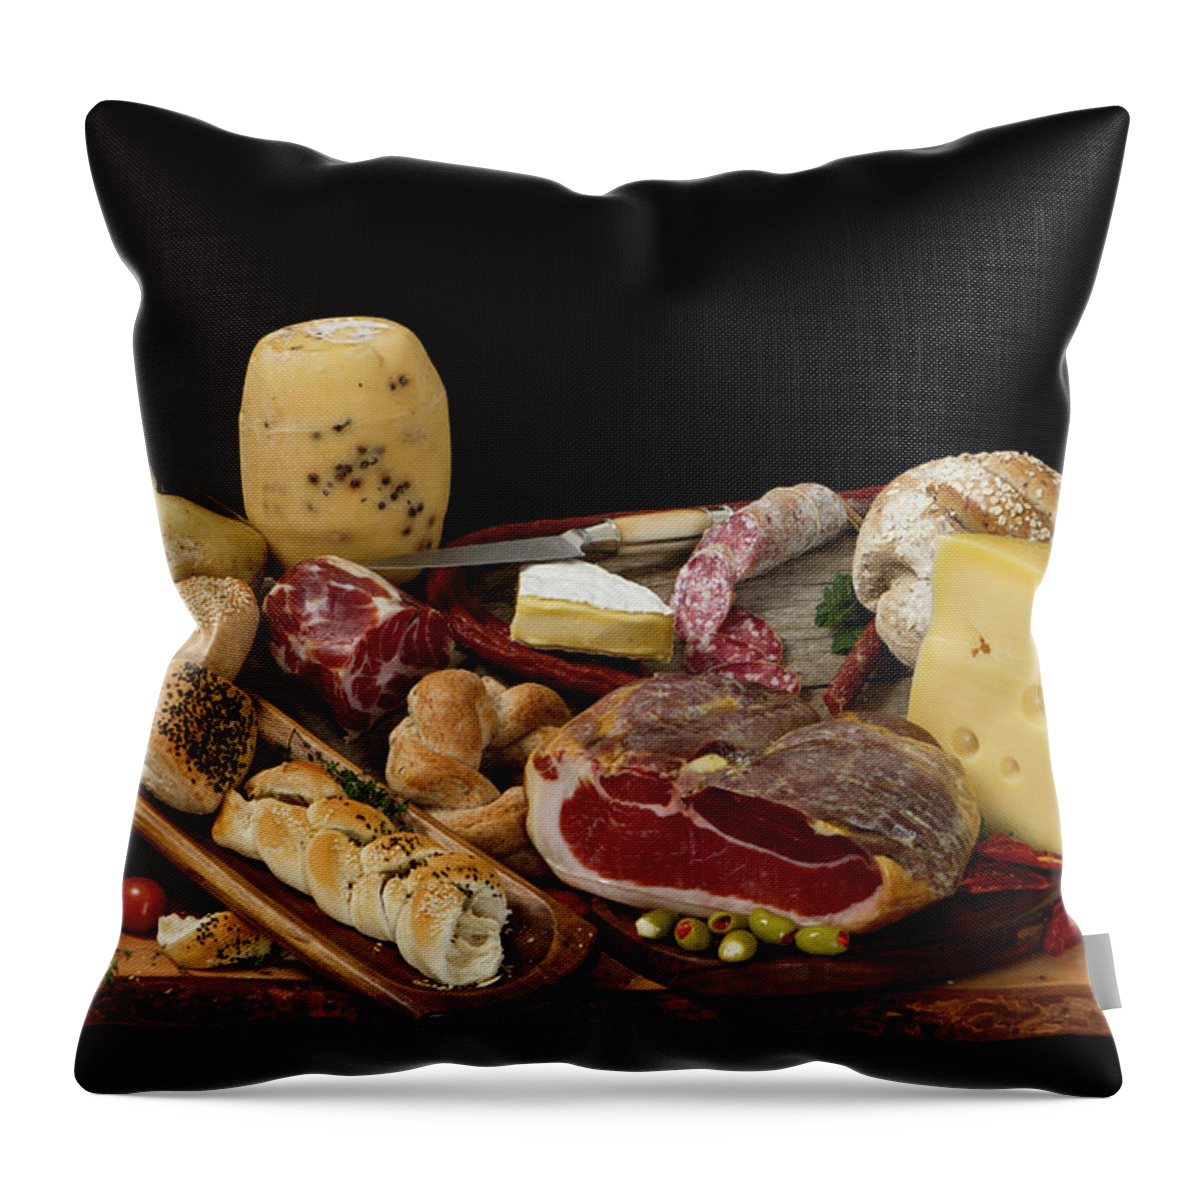 Cheese Throw Pillow featuring the photograph Delicious Typical Argentinean Antipasto by Ruizluquepaz